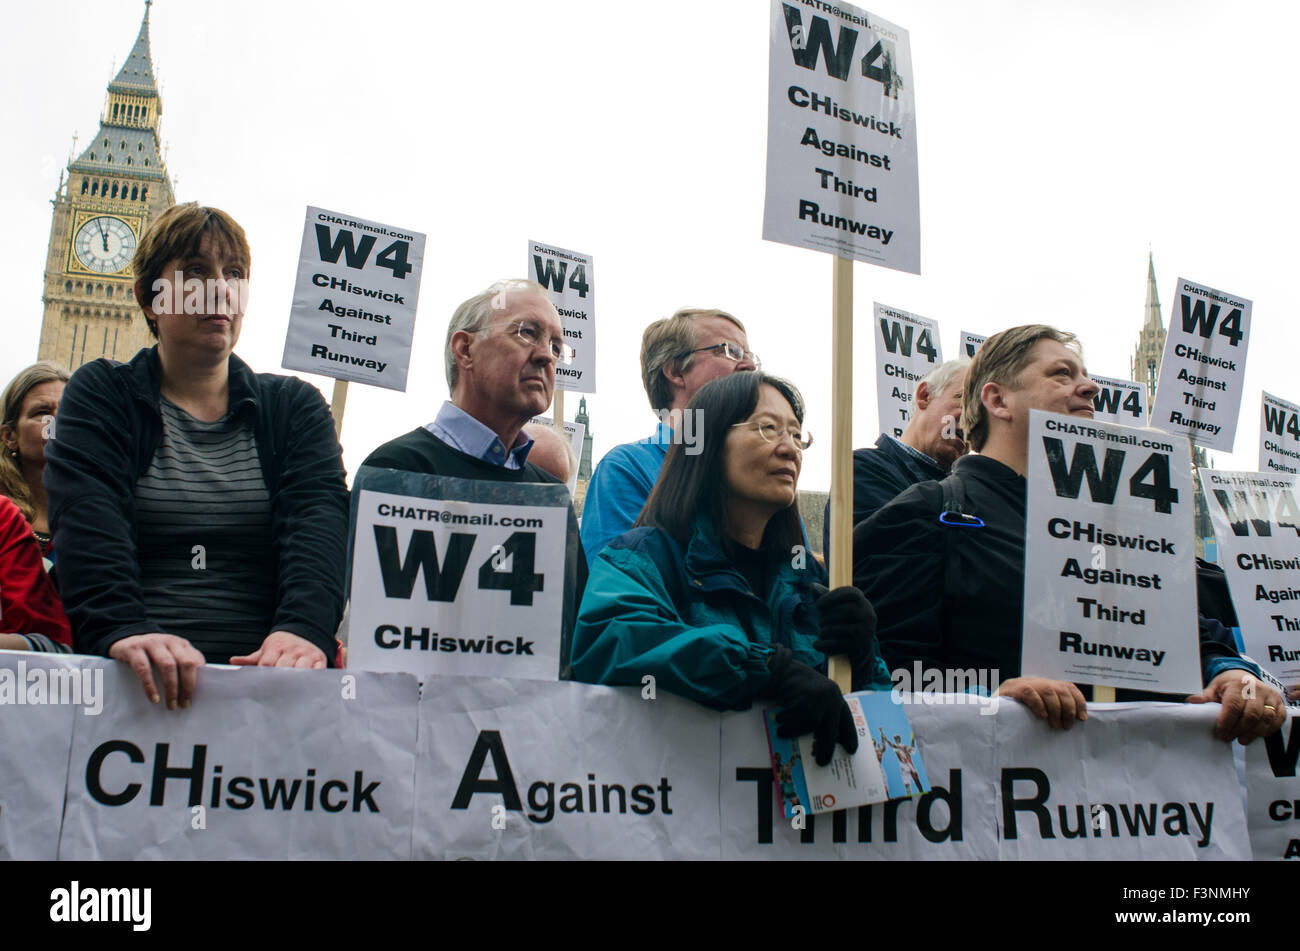 London, UK. 10th Oct, 2015. Protesters from Chiswick gather in Parliament Square, London. They are protesting against the proposal of a third Runway at Heathrow airport. Credit:  Bertie Oakes/Alamy Live News Stock Photo